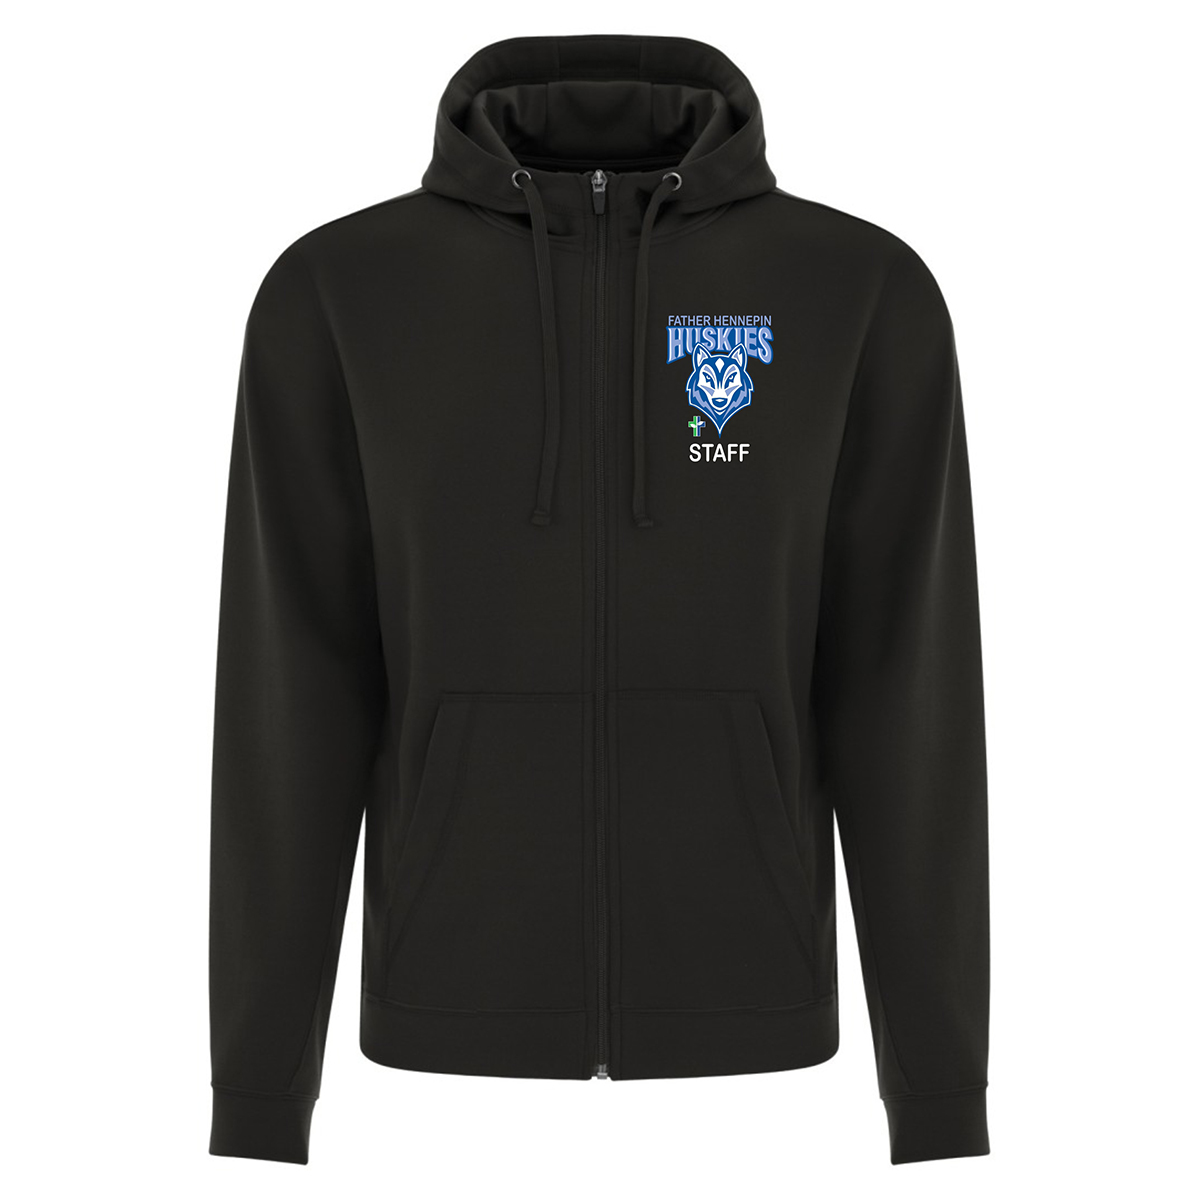 Father Hennepin Huskies Staff Mens 100% Polyester Full-Zip Hooded ...